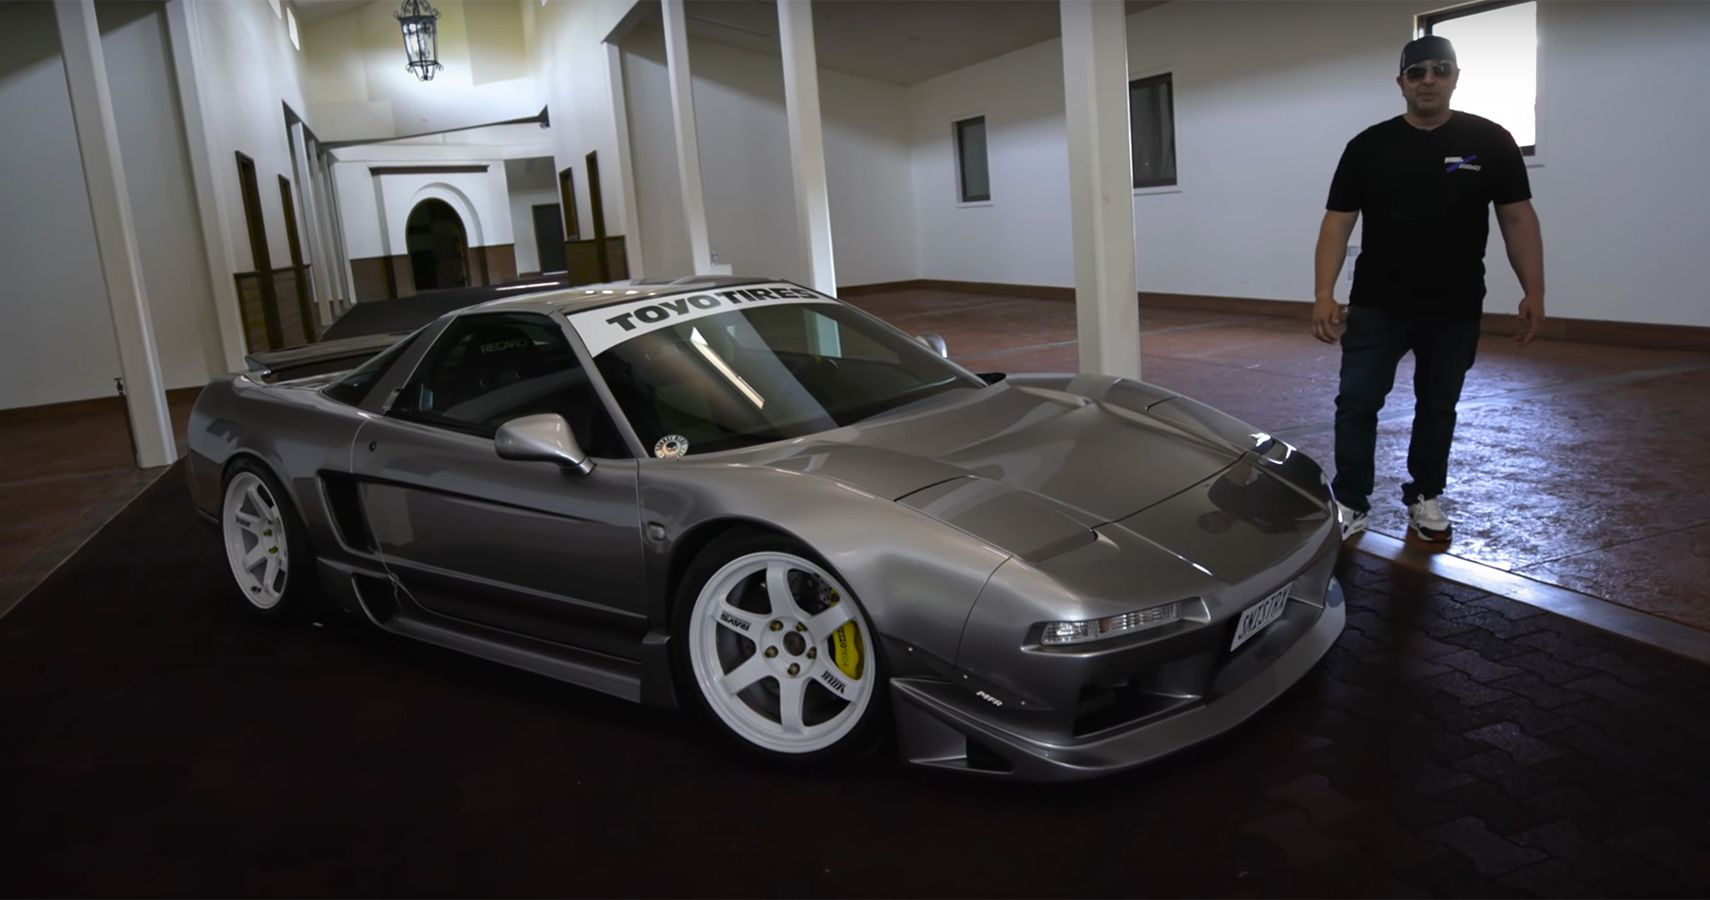 This Silver Acura NSX Build Has Marga Hills Widebody Kit Strapped On It